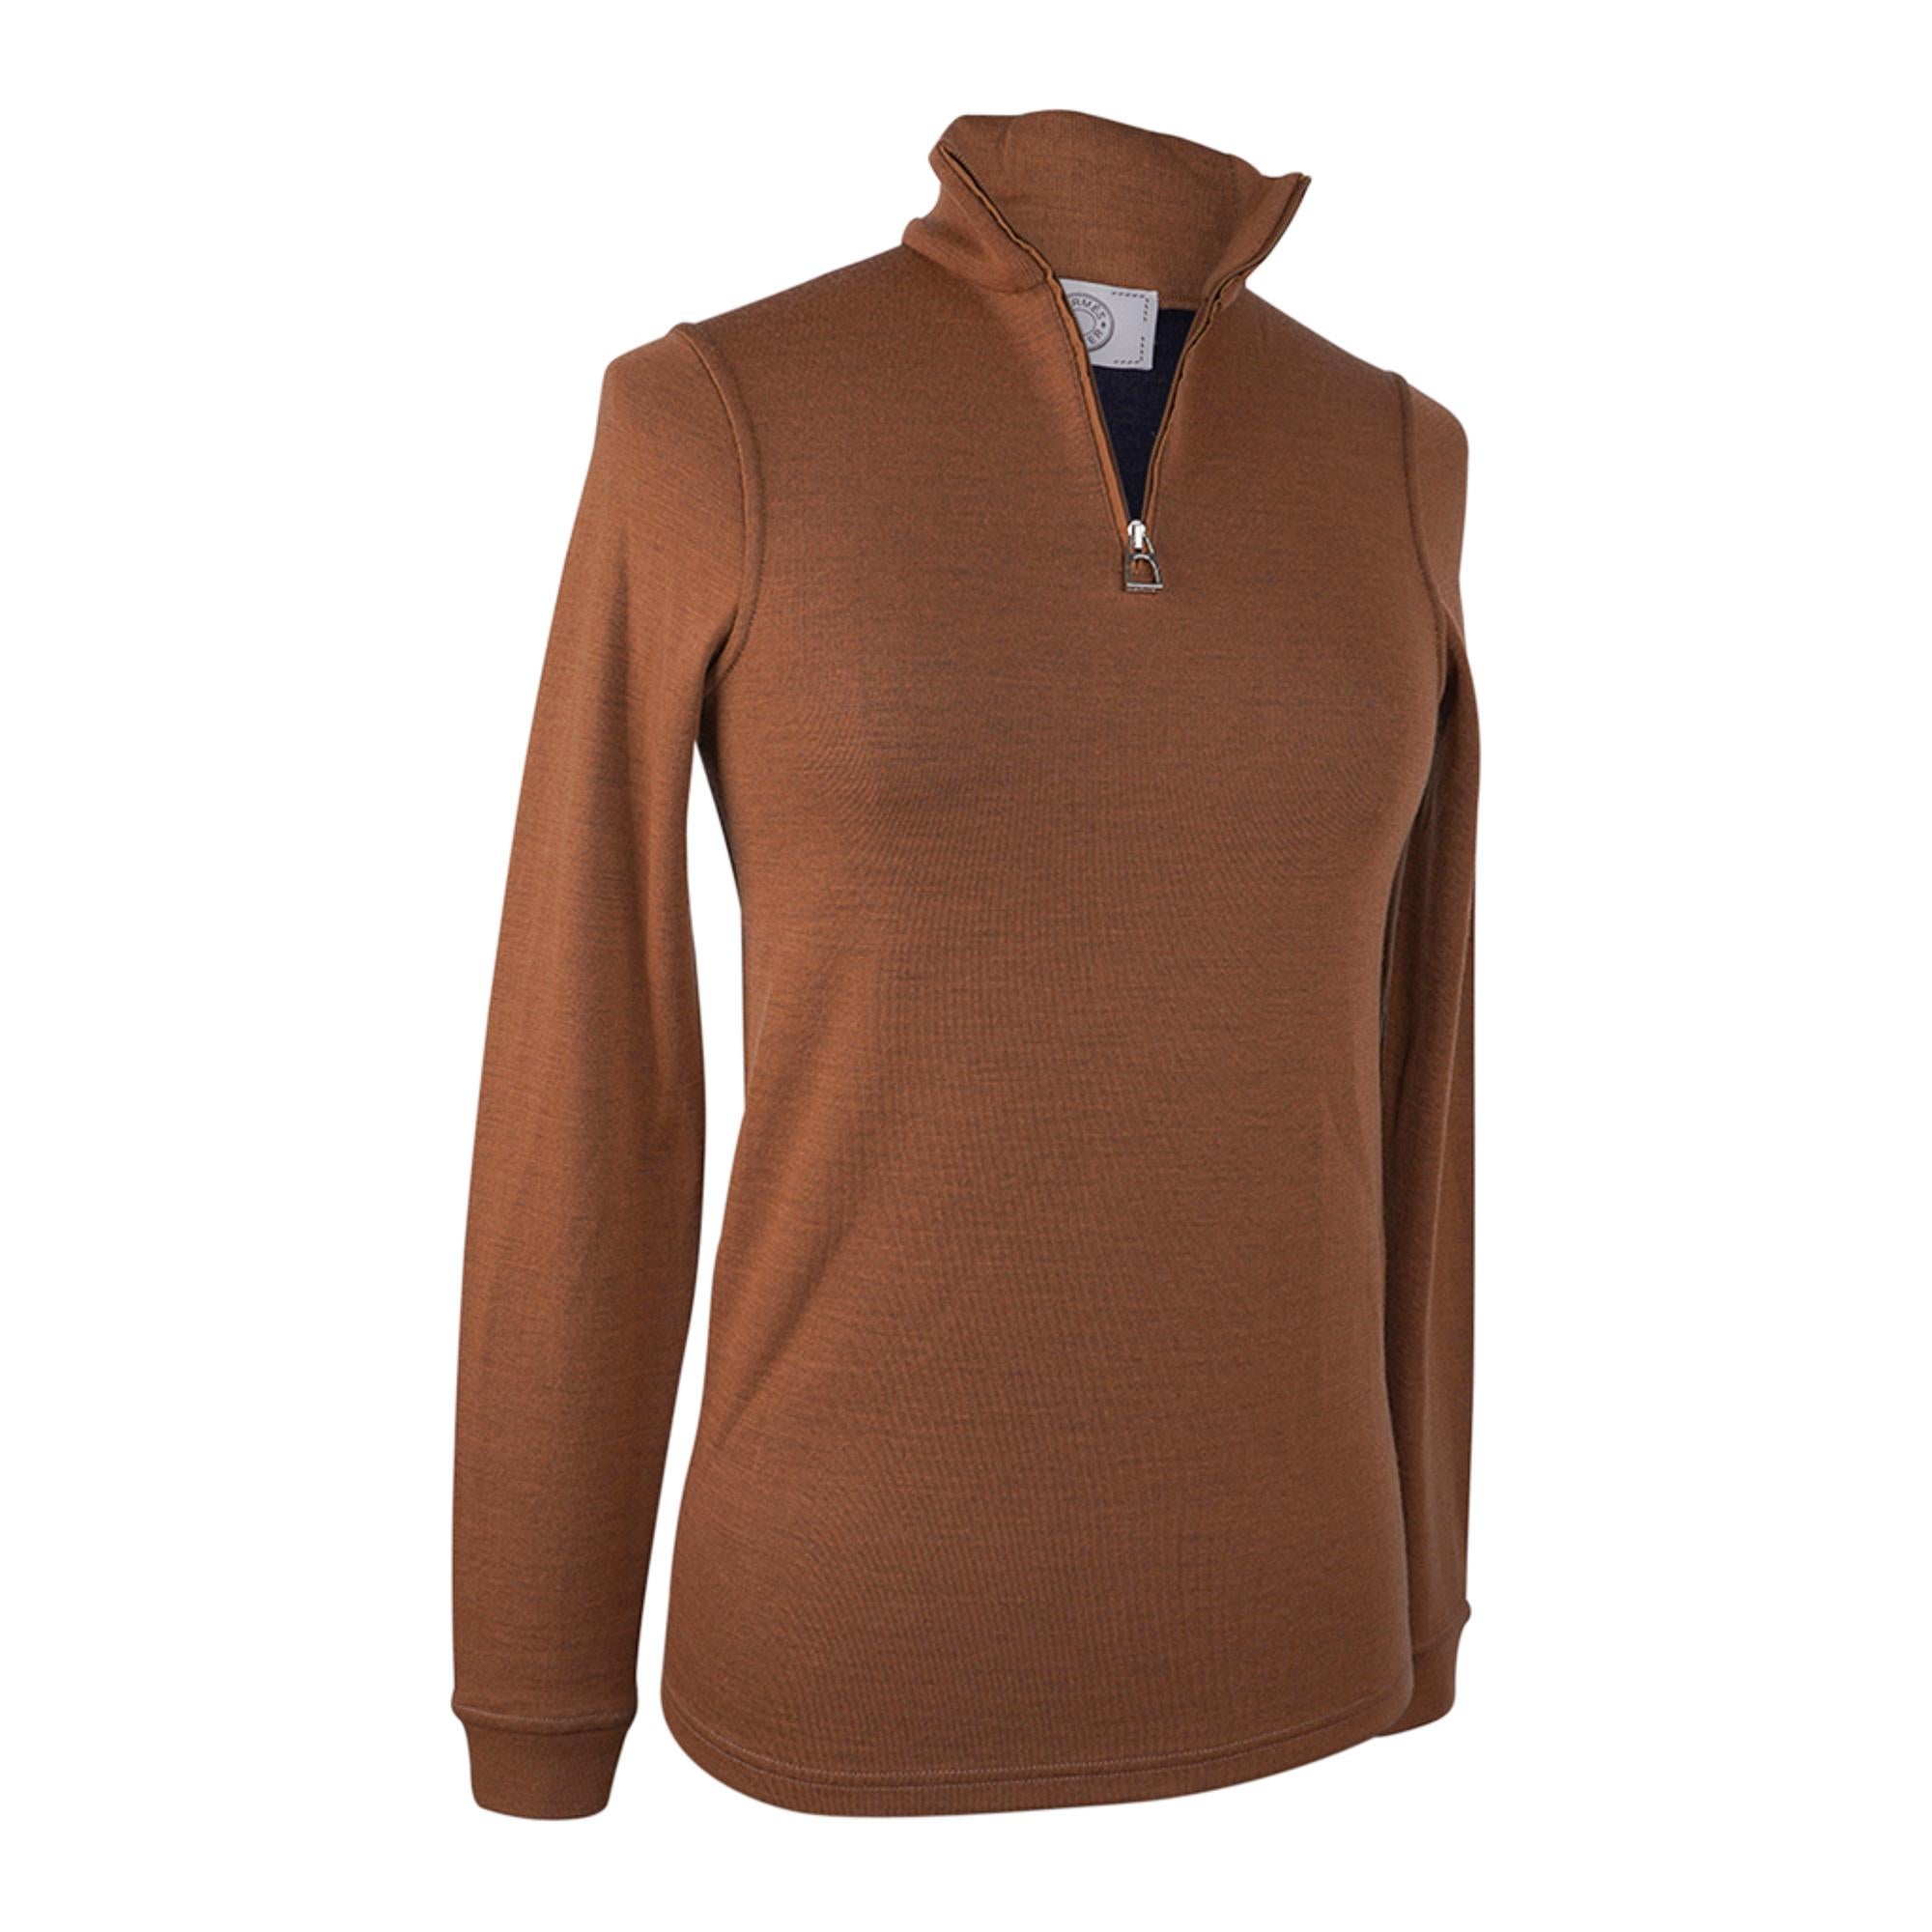 Mightychic offers an Hermes Women's Cocoon Base Layer Top in Fauve.
Long sleeved extra thin Merino wool blend top.
Part of the Equestrian collection, the cut and fabric promote freedom of
movement.
Polo neck collar and zip with logo embossed stirrup